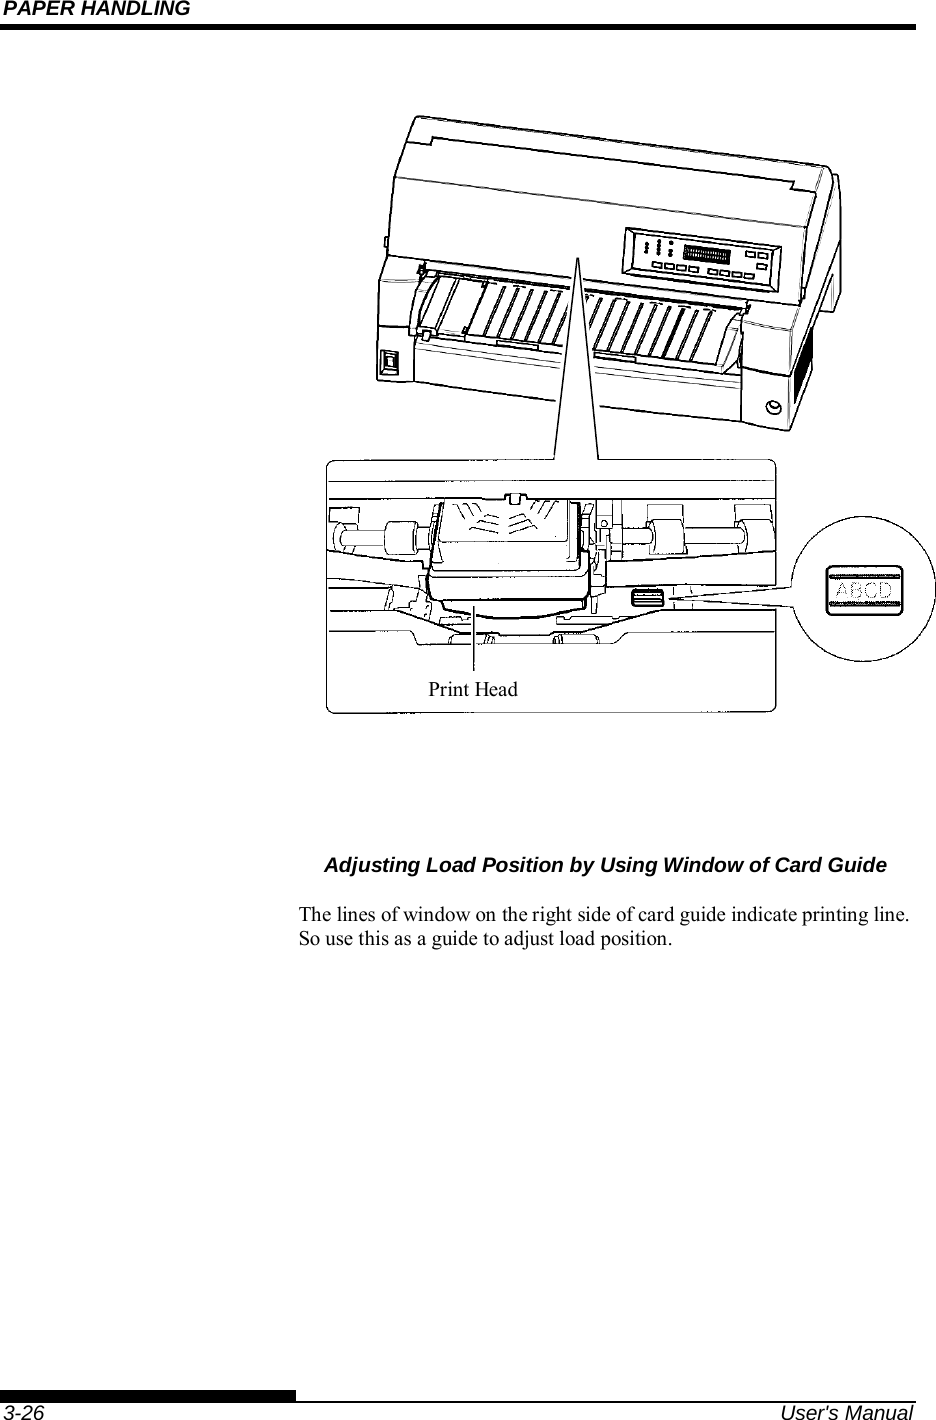 PAPER HANDLING    3-26  User&apos;s Manual                   Adjusting Load Position by Using Window of Card Guide  The lines of window on the right side of card guide indicate printing line. So use this as a guide to adjust load position.   Print Head 